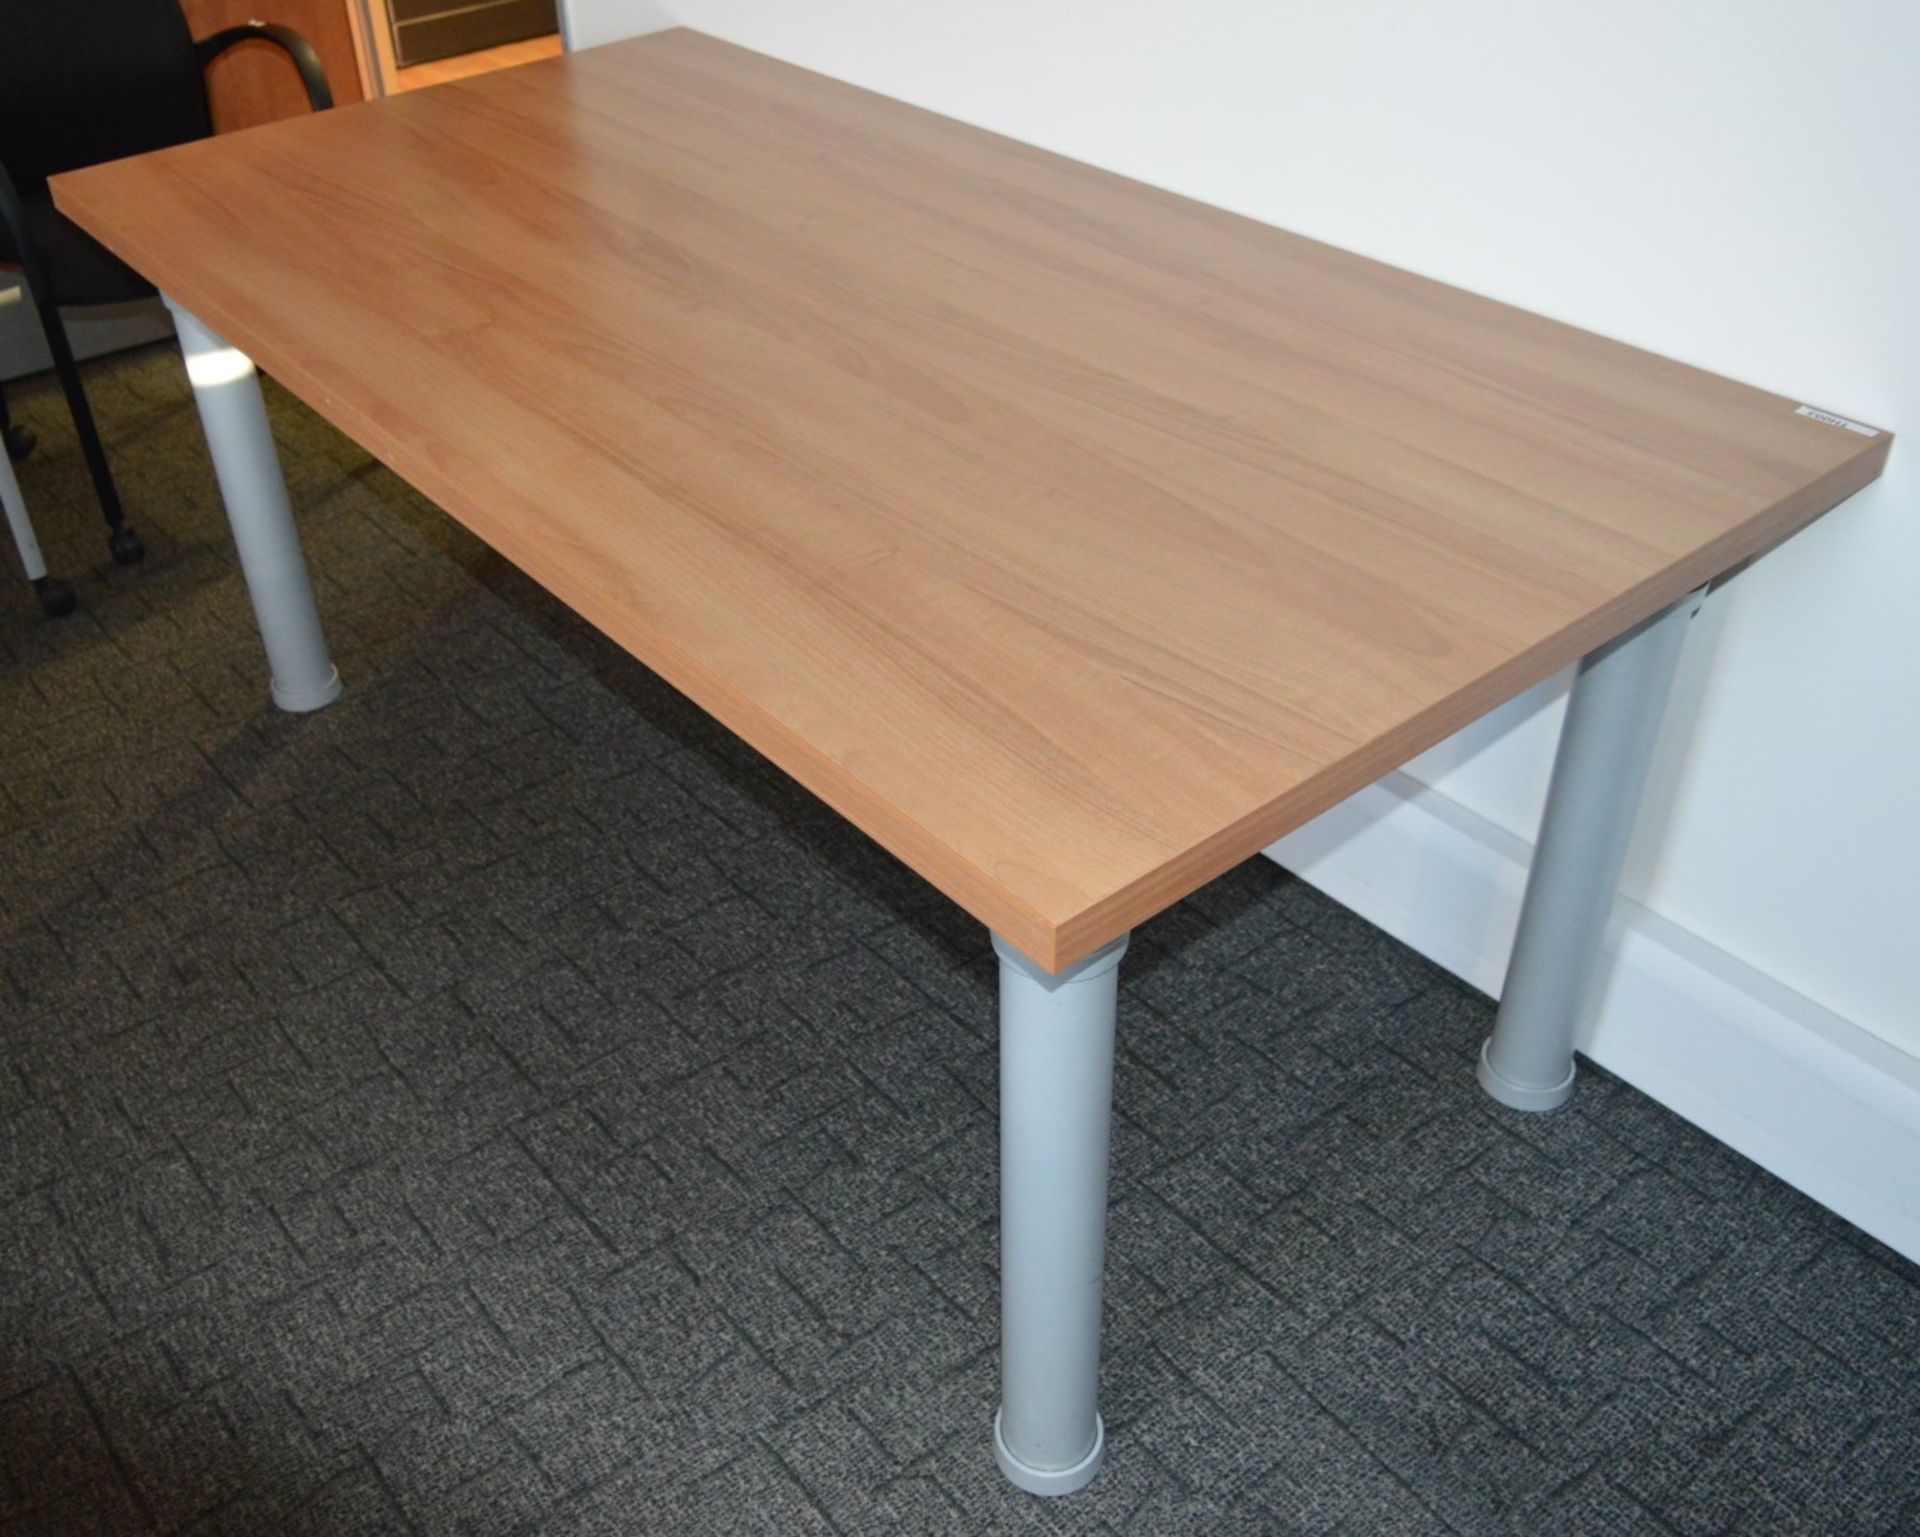 1 x Conference Office Table - Beech Finish - High Quality Office Furniture - H73.5 x W175 x D90 - Image 3 of 13